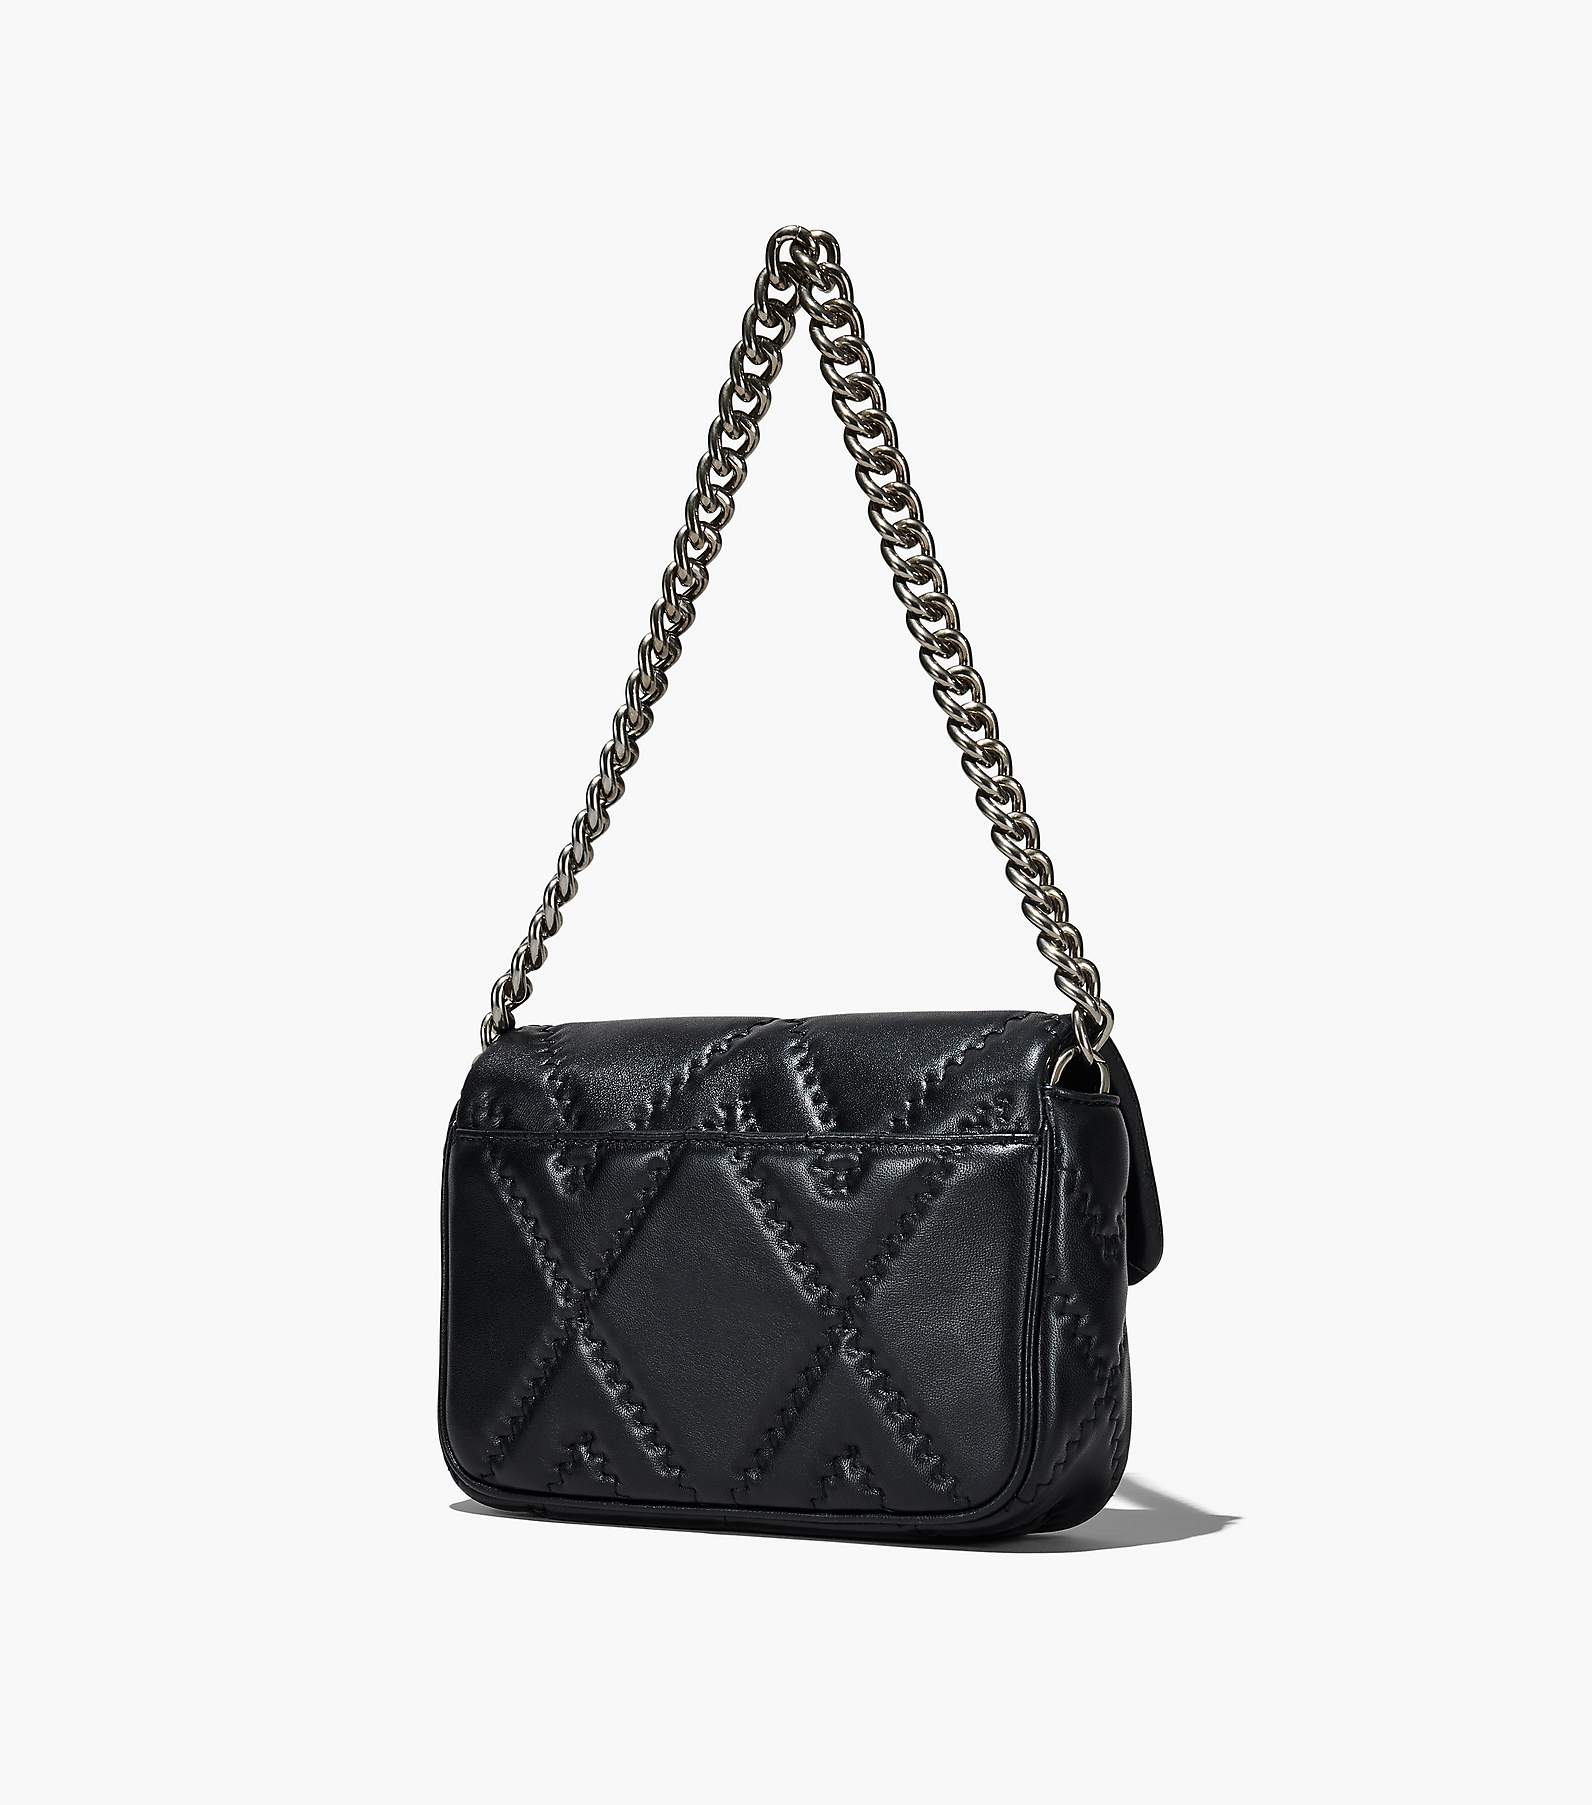 Marc Jacobs Quilted Faux Leather Shoulder Bag in Gray